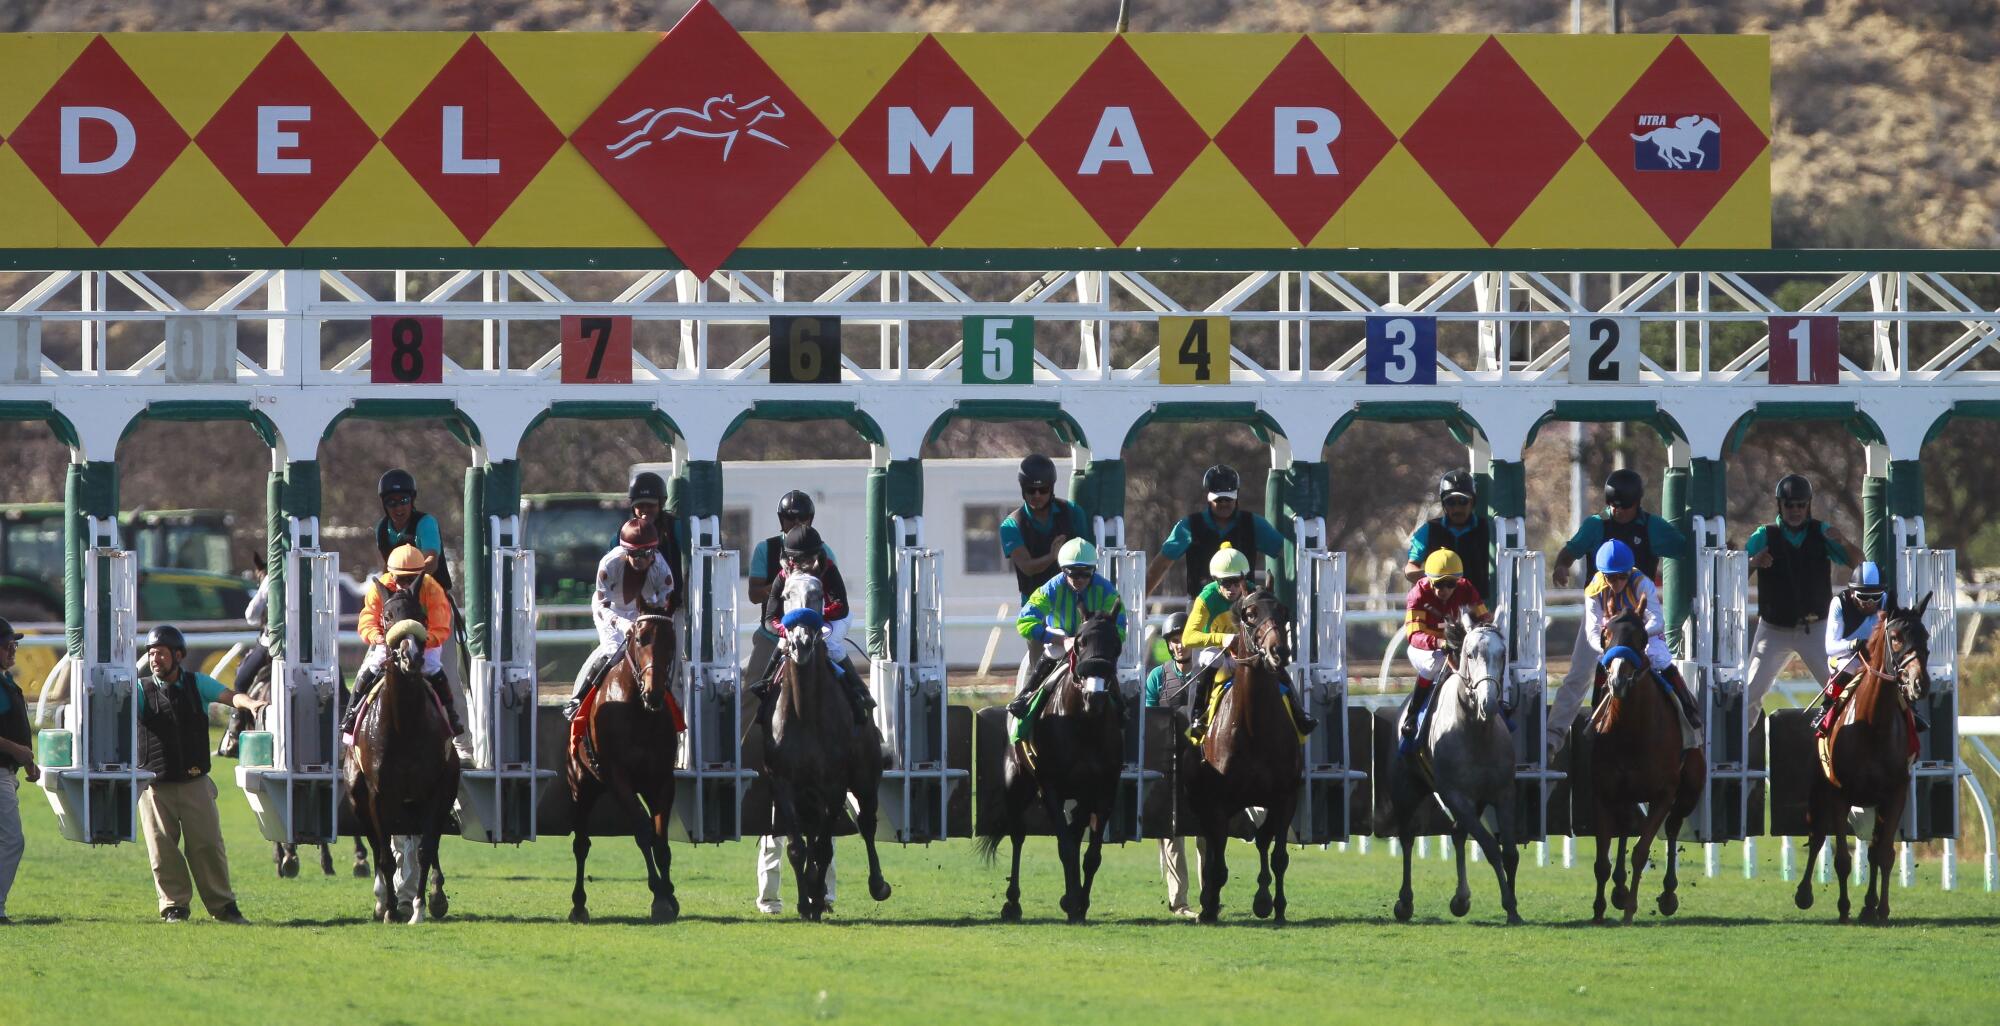 Horses come out of the gates at the start during a race on opening day of the 2018 fall meet at the Del Mar.